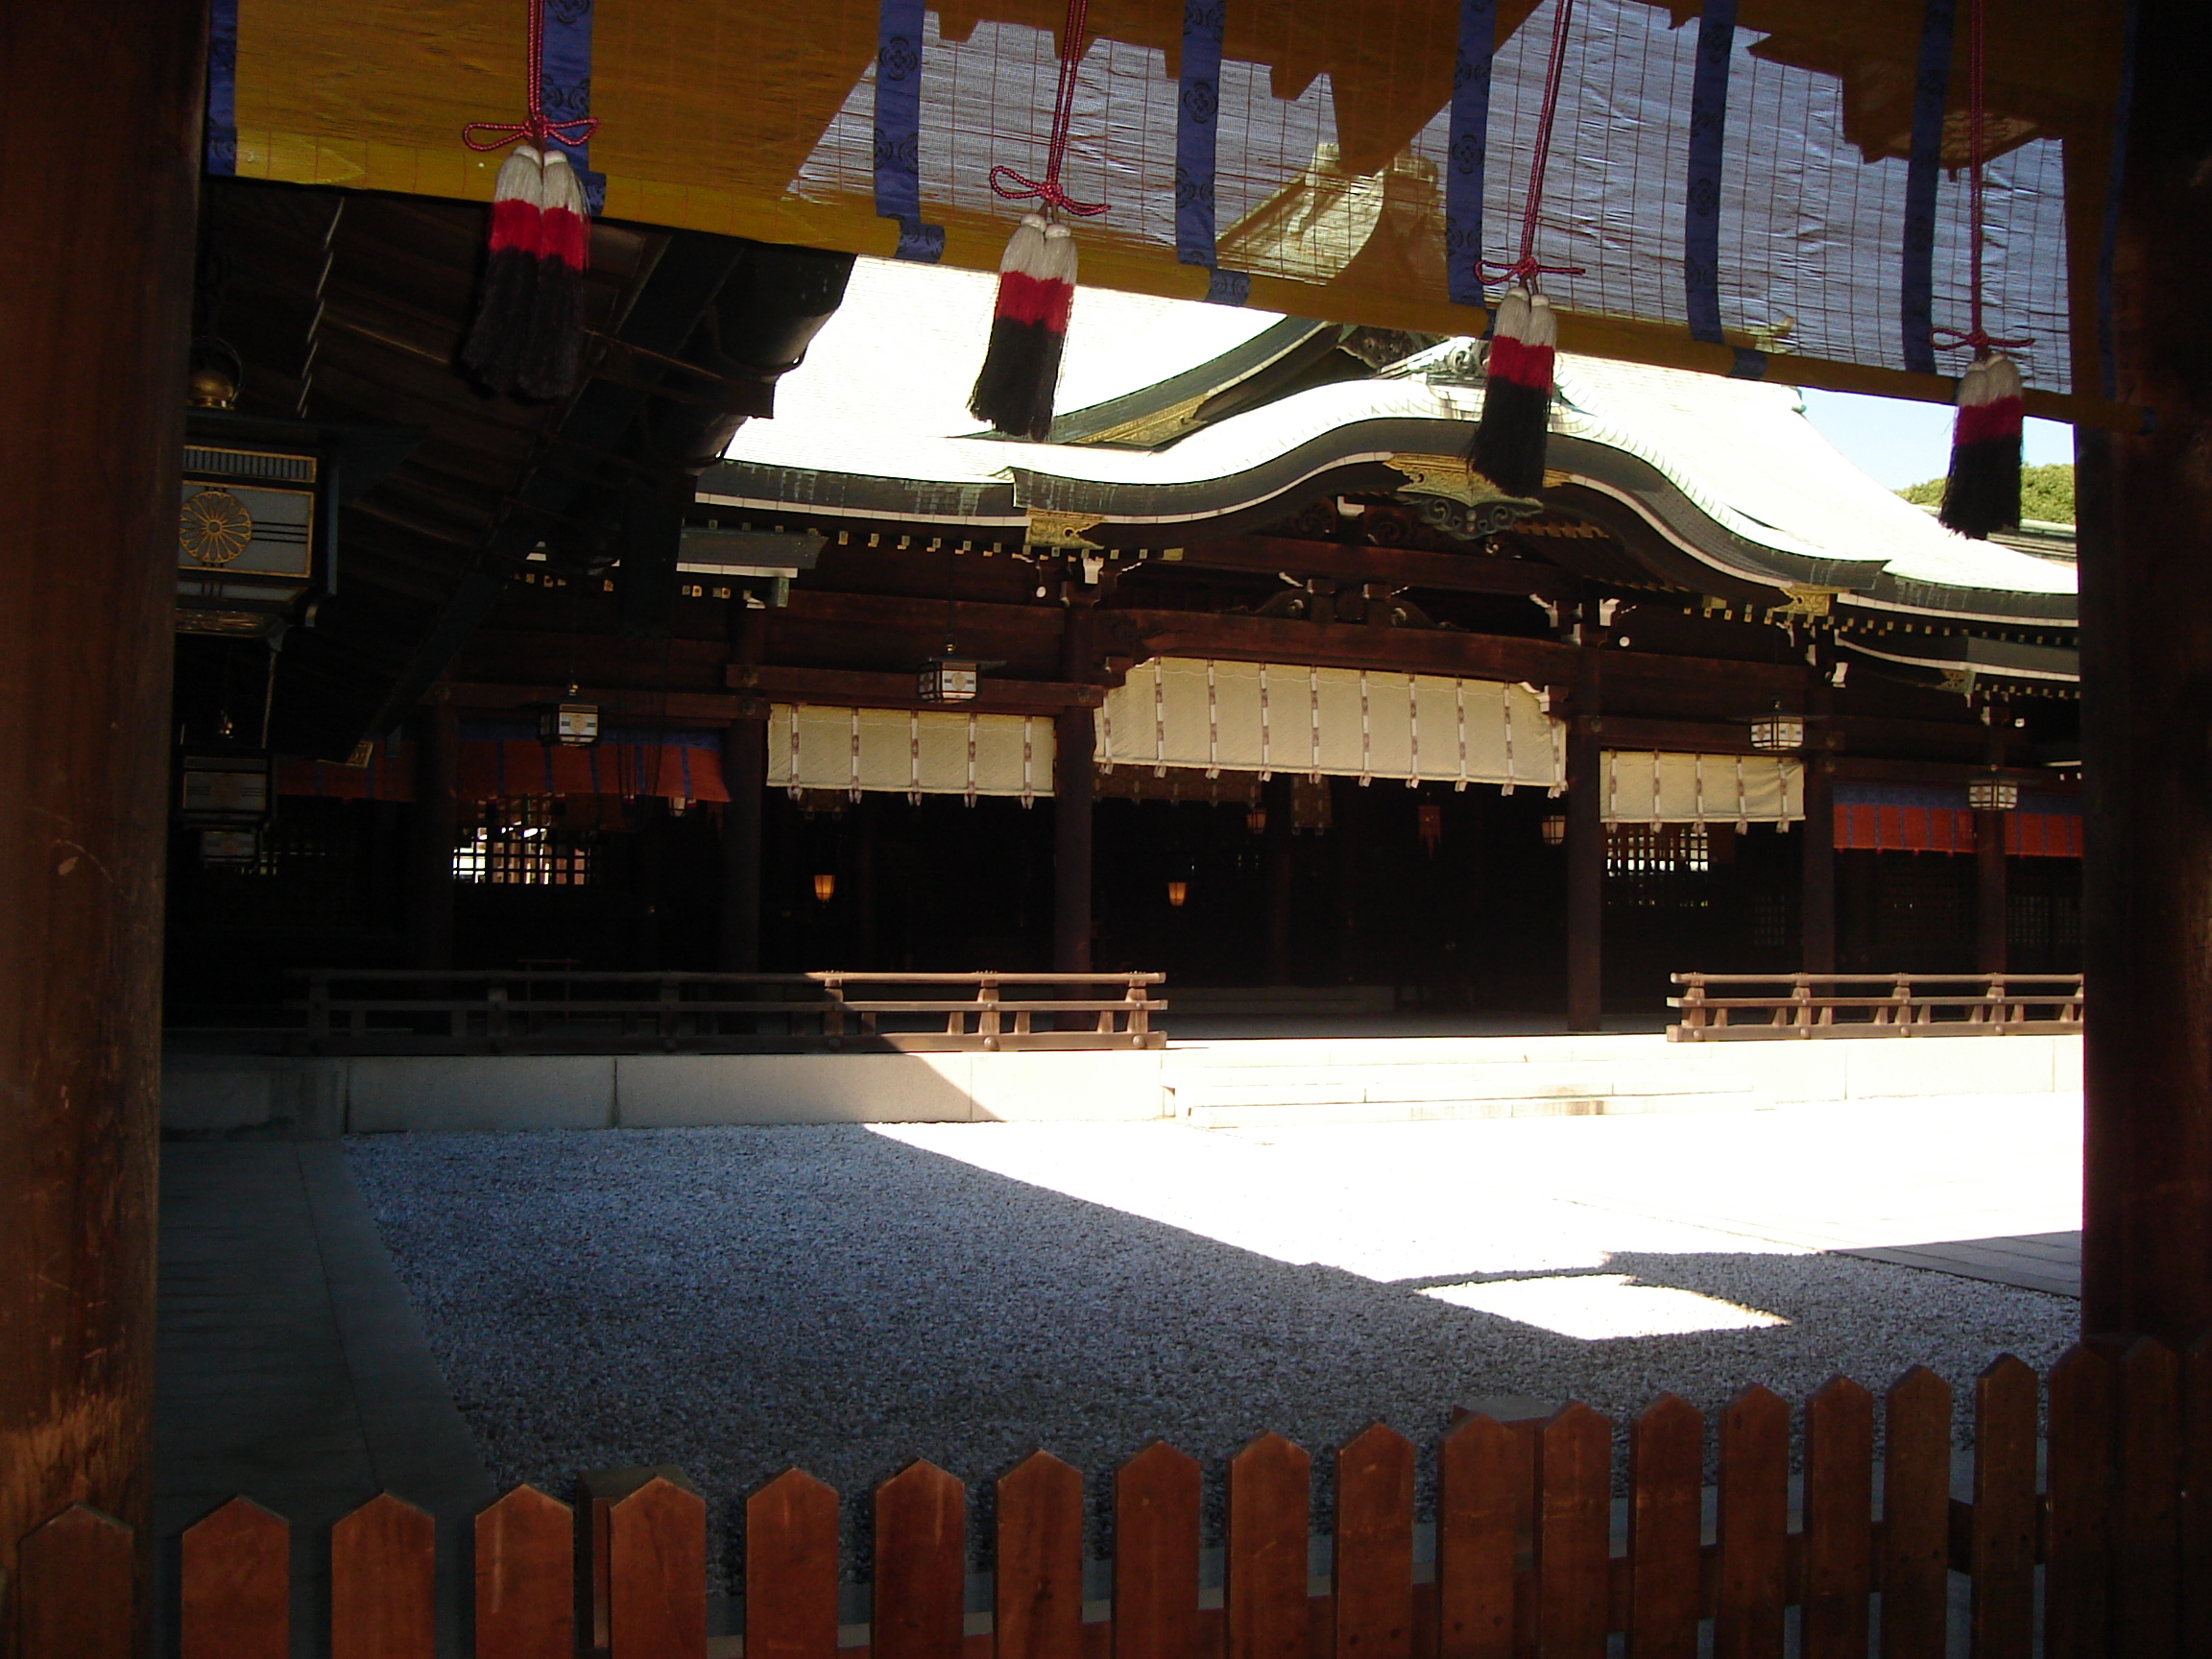 a closer view of the dark shrine building where lanterns and curtains are barely visible